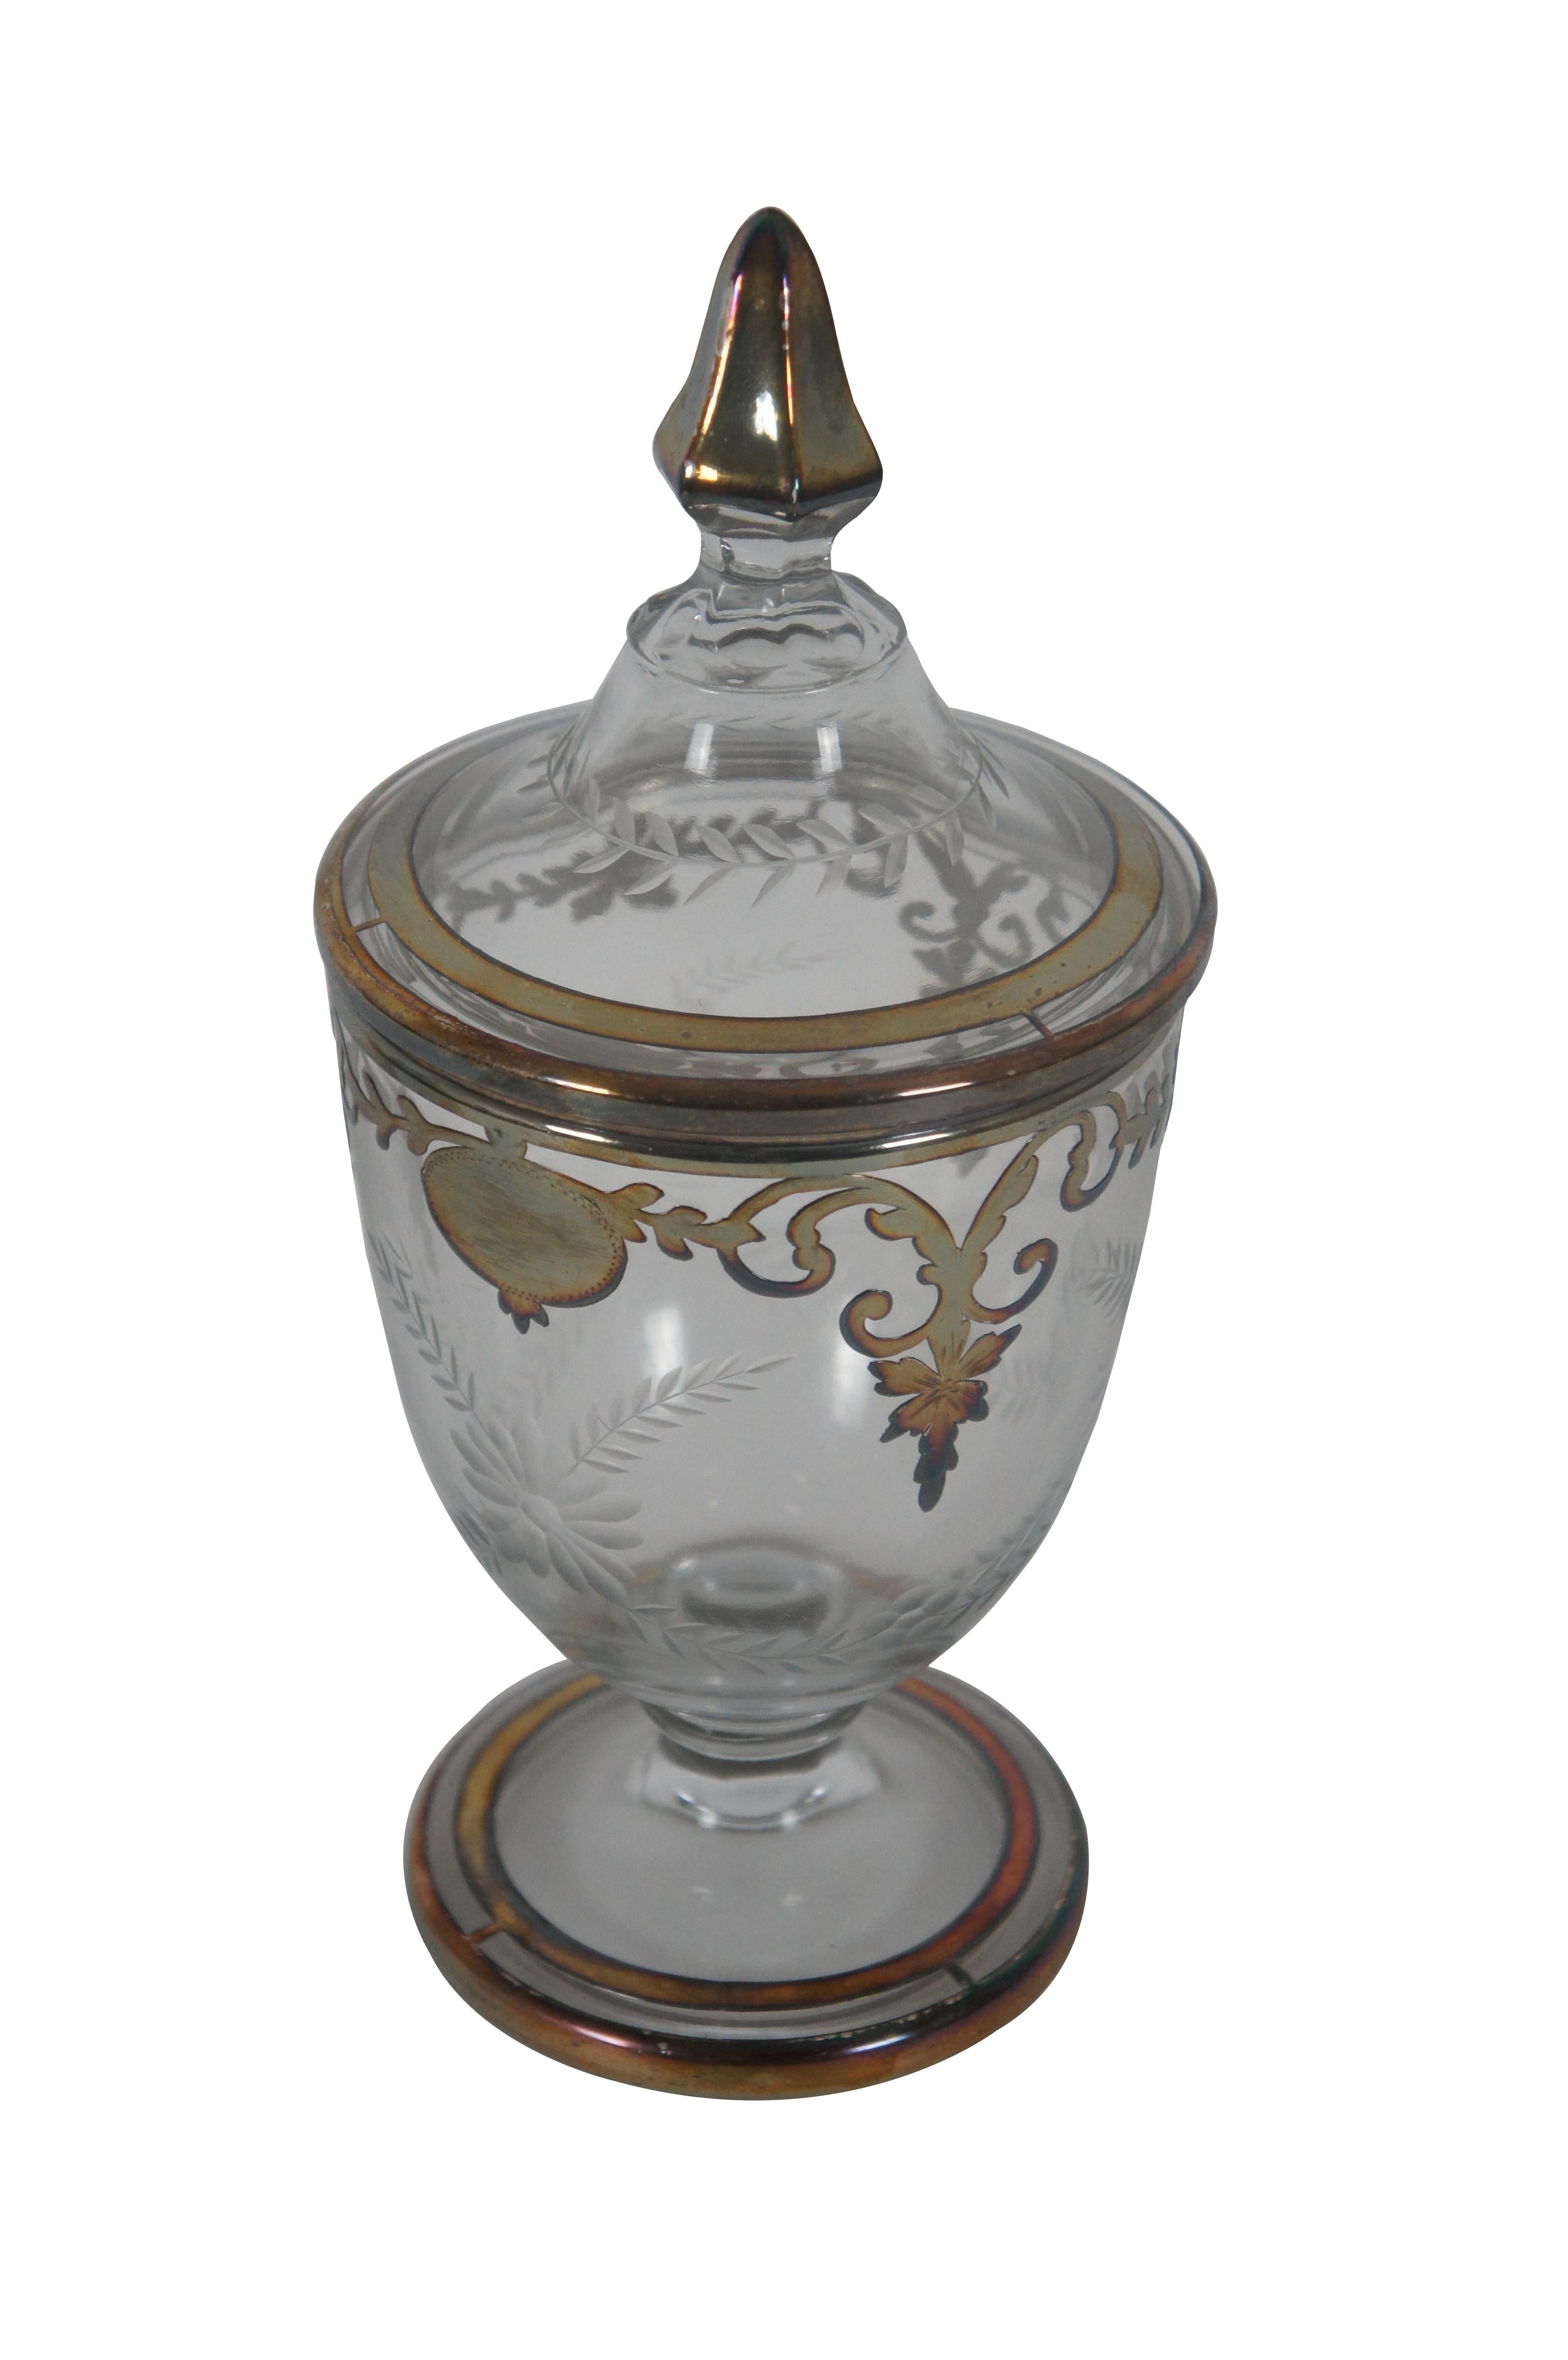 Antique Heisey pressed and etched glass candy jar / compote featuring trophy urn form with footed pedestal base, baroque sterling silver overlay and lidded top with finial.

Dimensions:
4.25